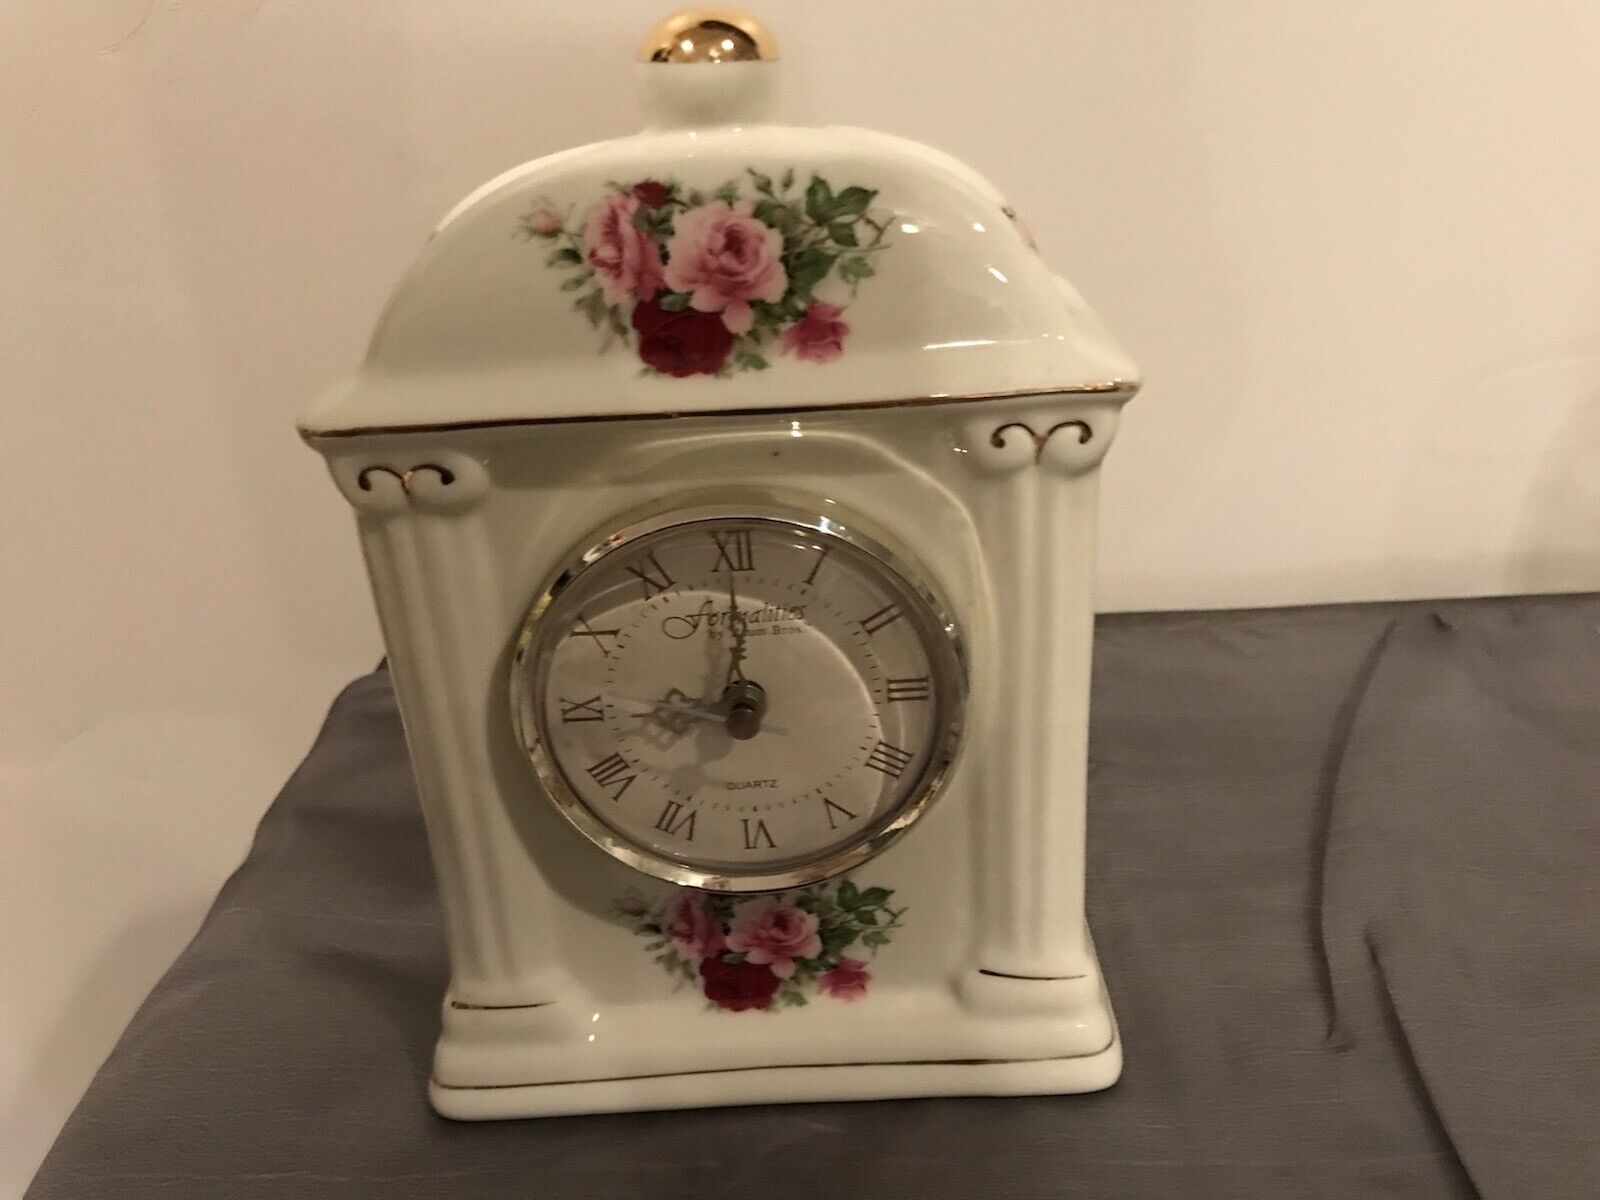 Vintage Formalities By Baum Brothers Porcelain Mantle Clock Victorian Rose